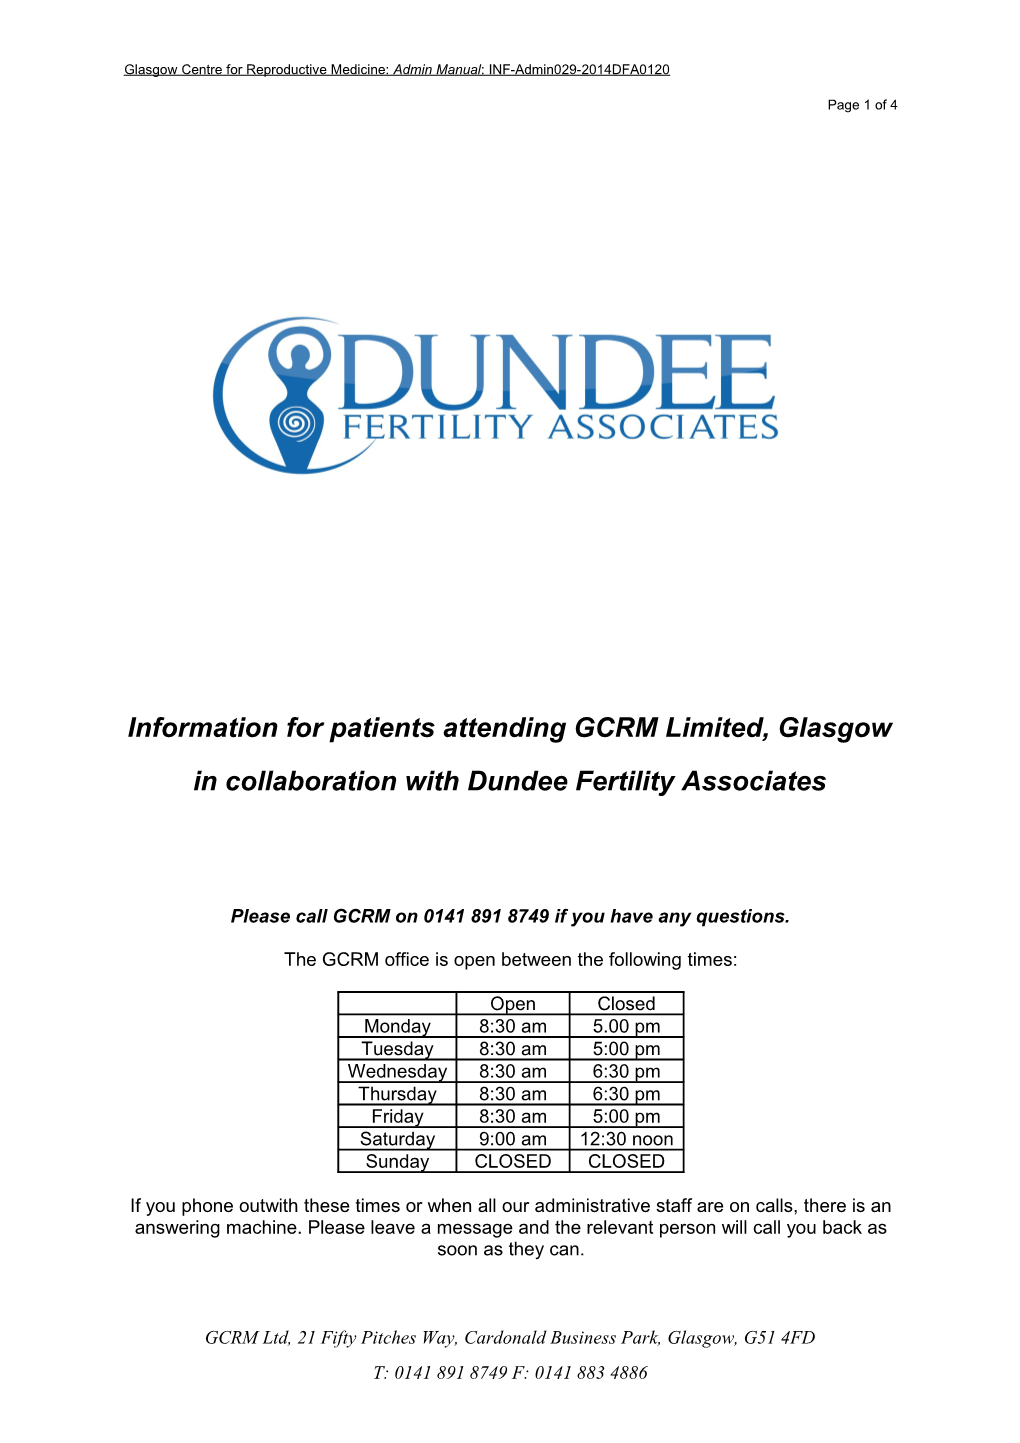 Information for Patients Attending GCRM Limited, Glasgow